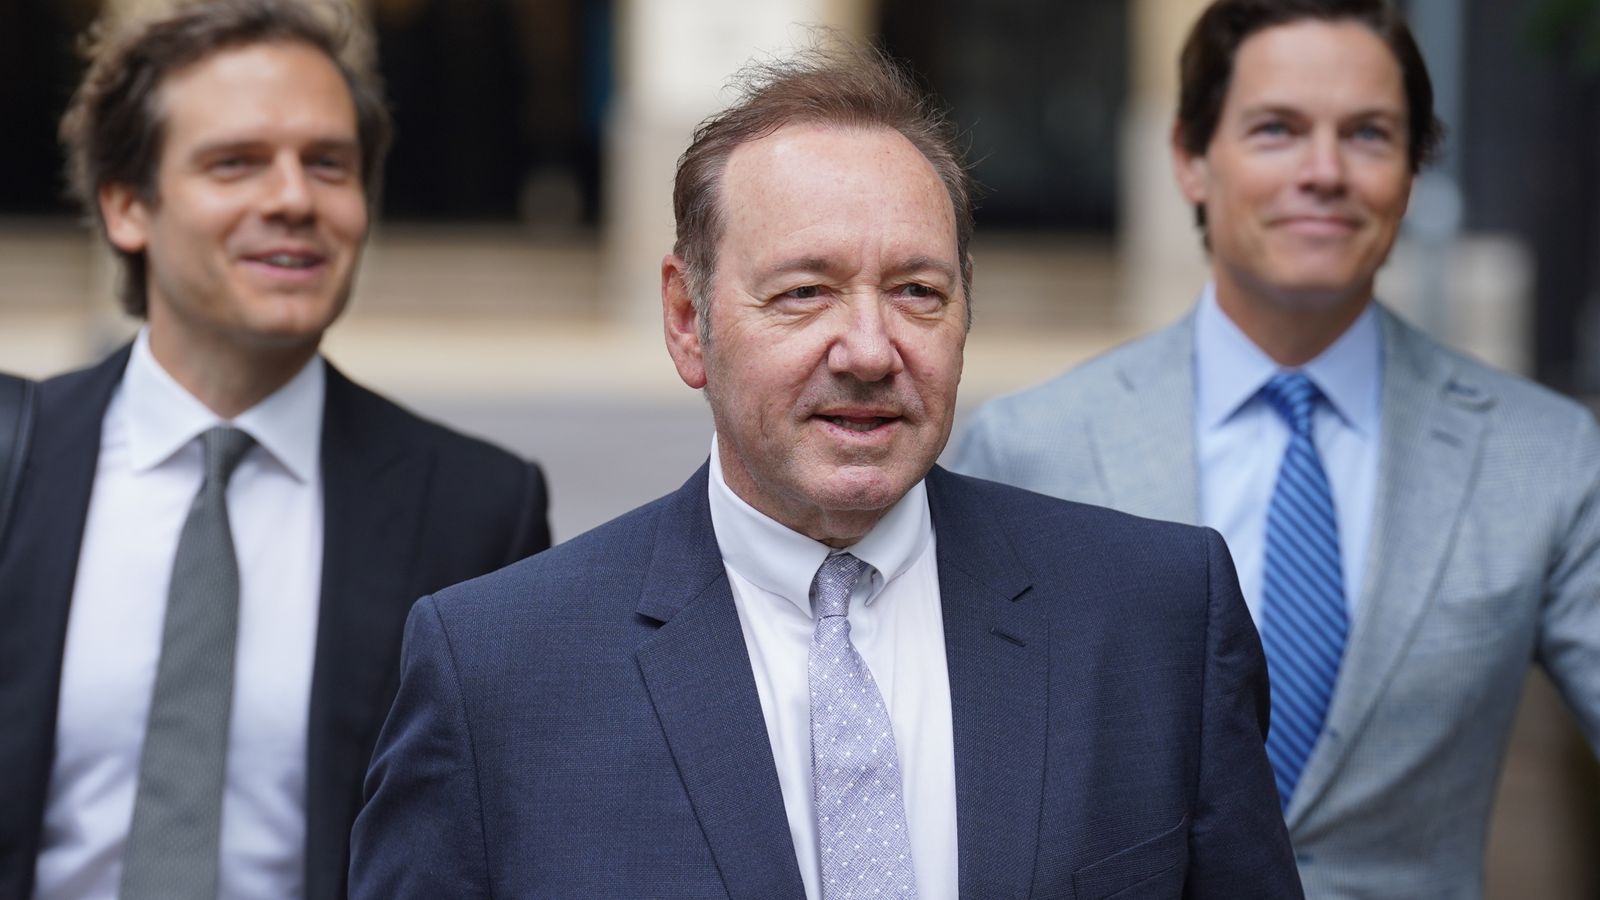 Kevin Spacey told man to 'be cool' as he kissed neck and grabbed him, court hears